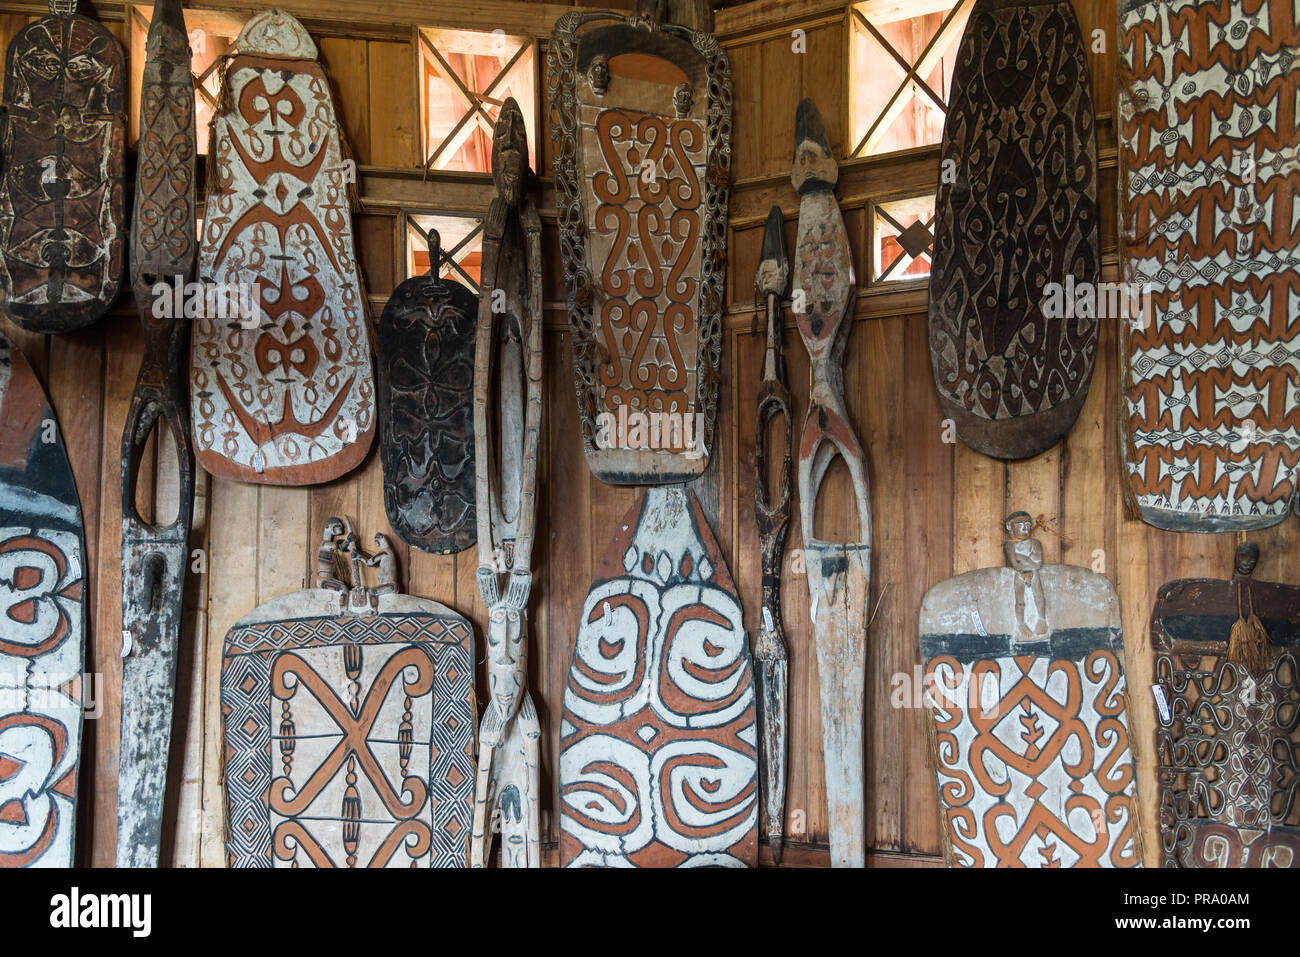 A collection of native war shield hanging on a wall. Wamena, Papua, Indonesia. Stock Photo